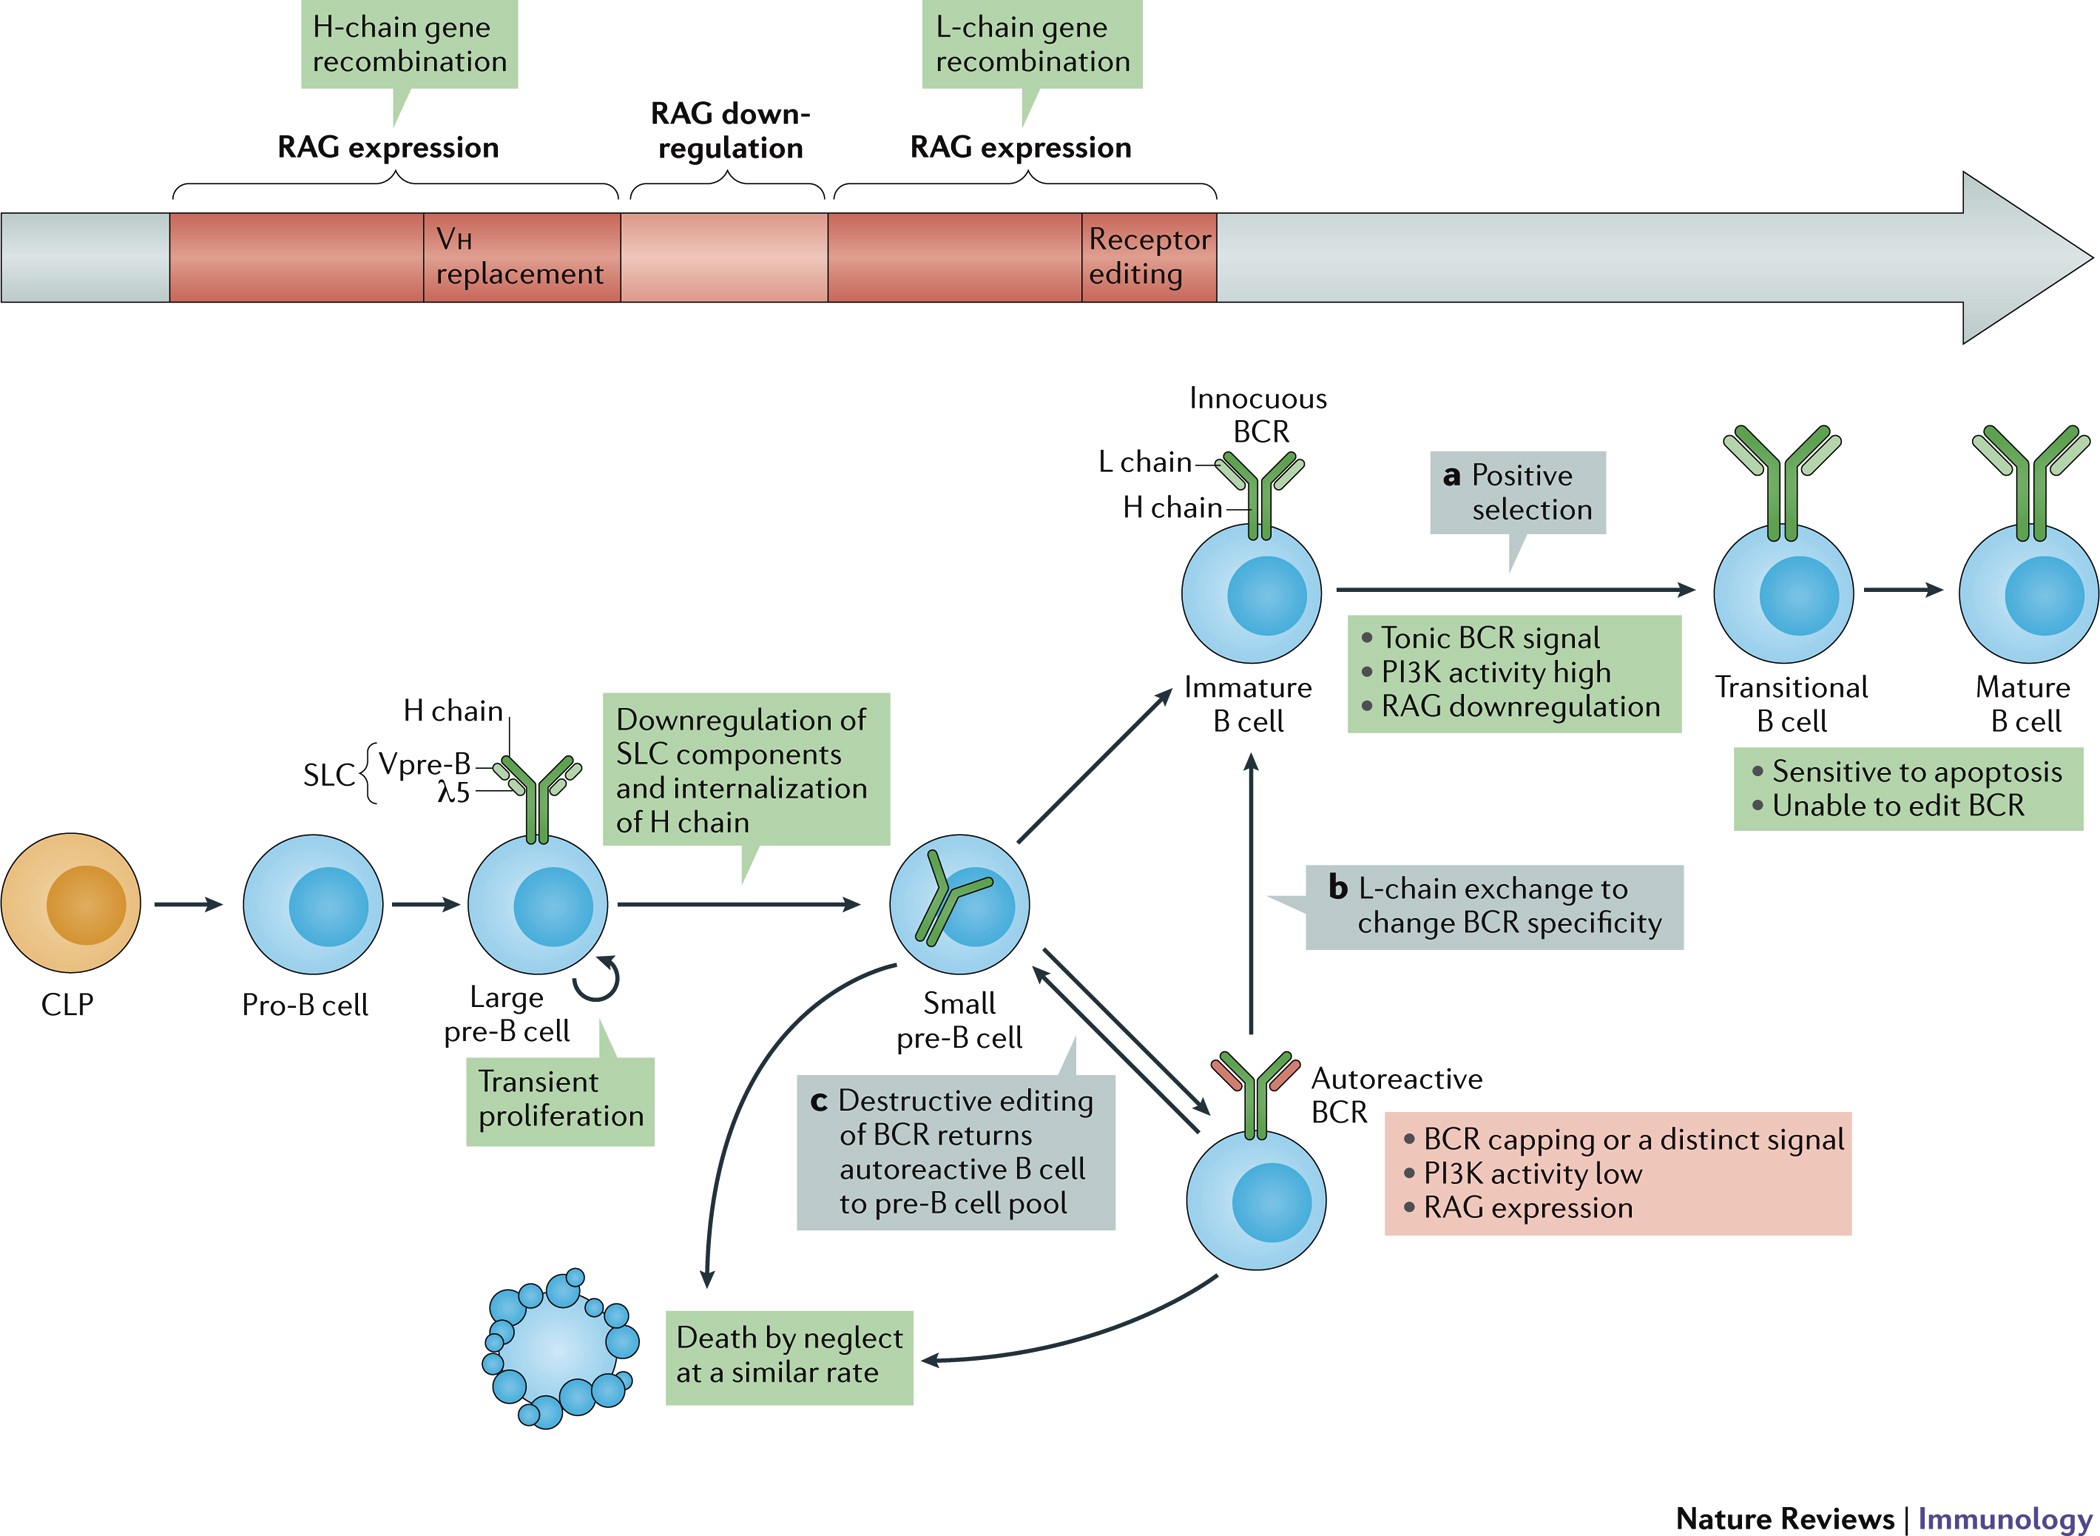 Mechanisms of central tolerance for B cells | Nature Reviews Immunology